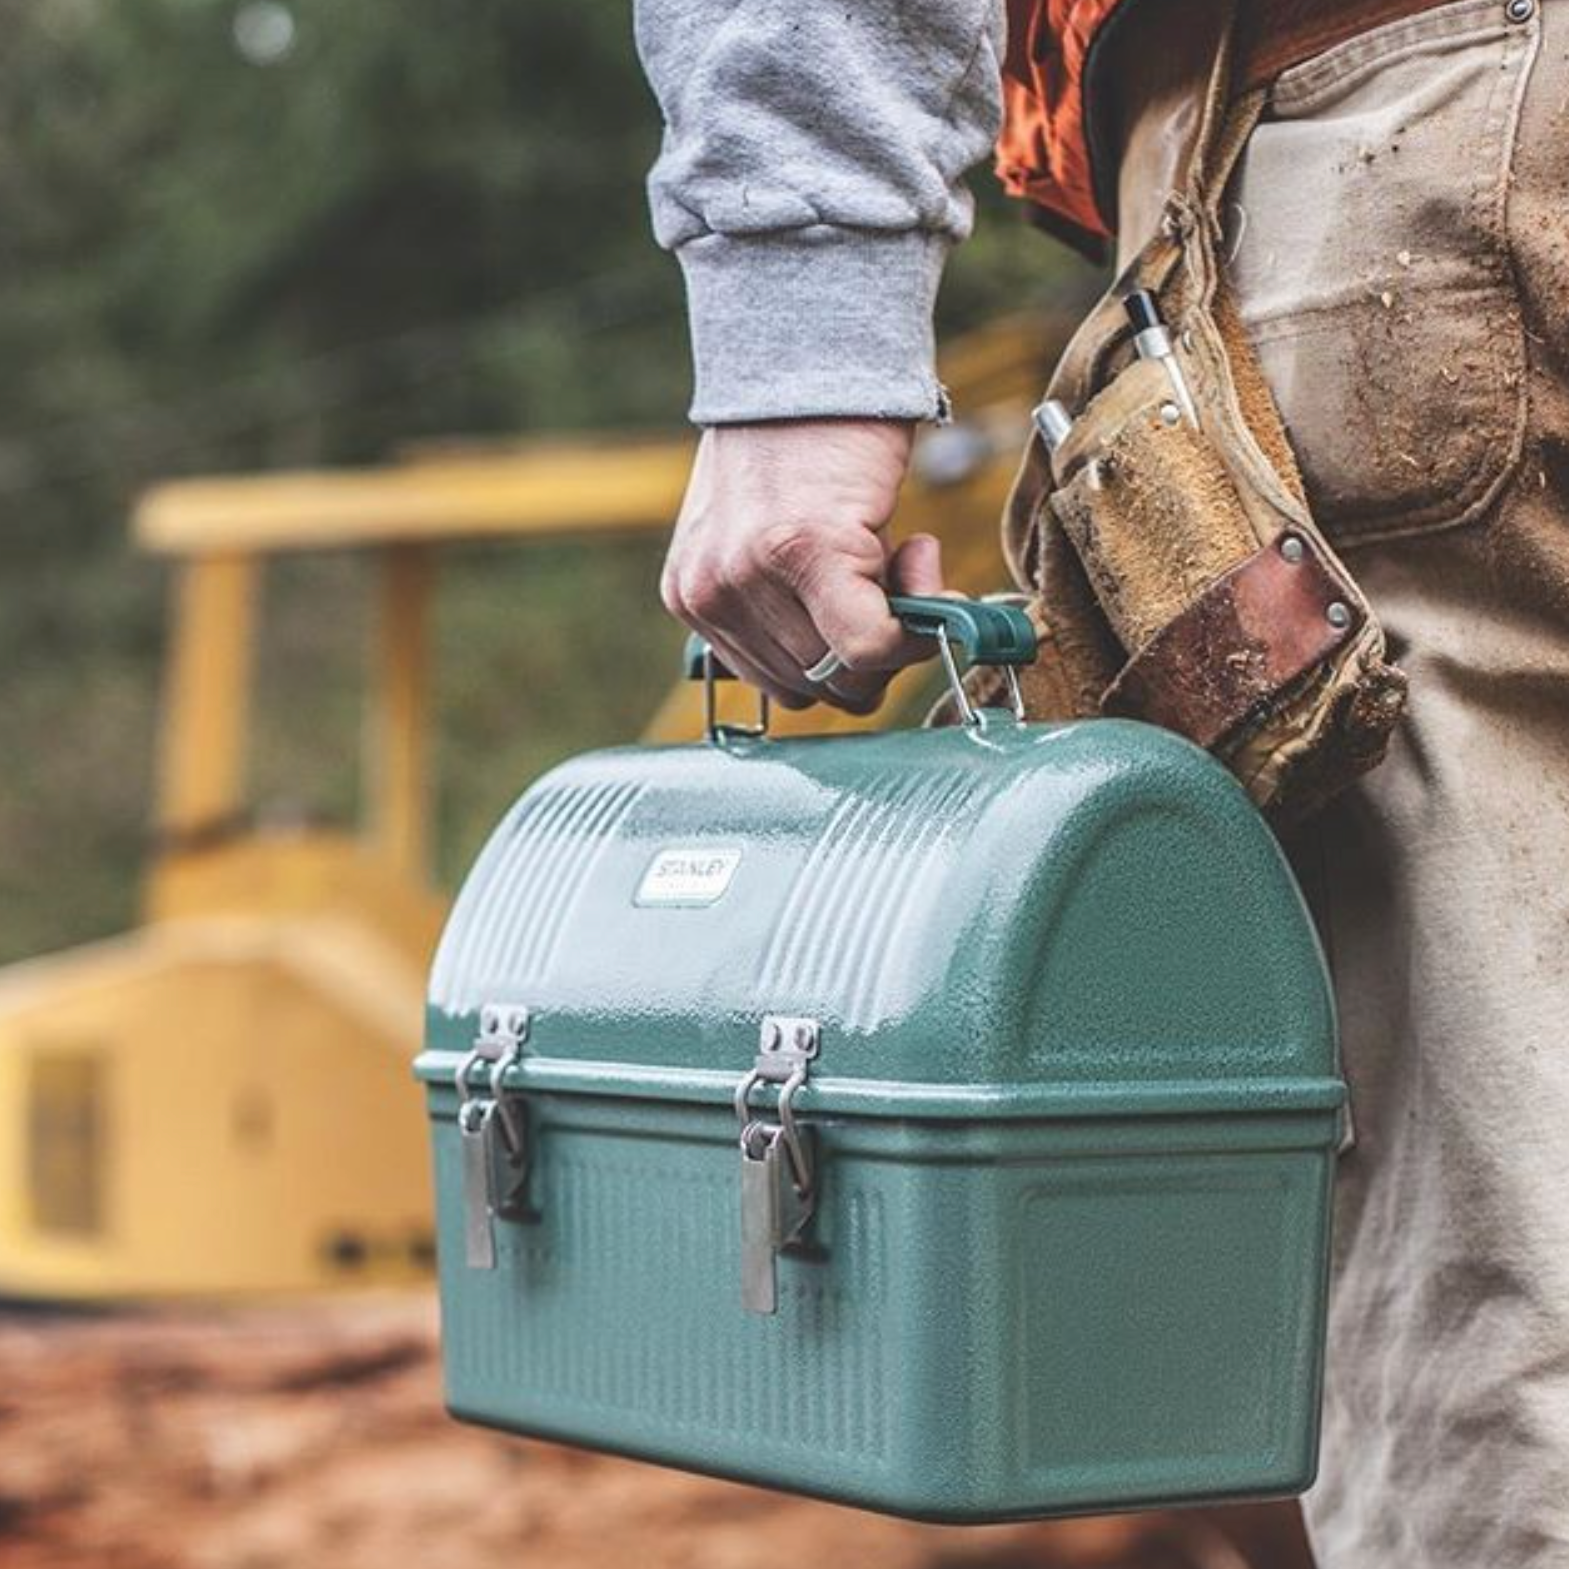 Stanley - Always timeless, durable and classic, our Lunch Box just